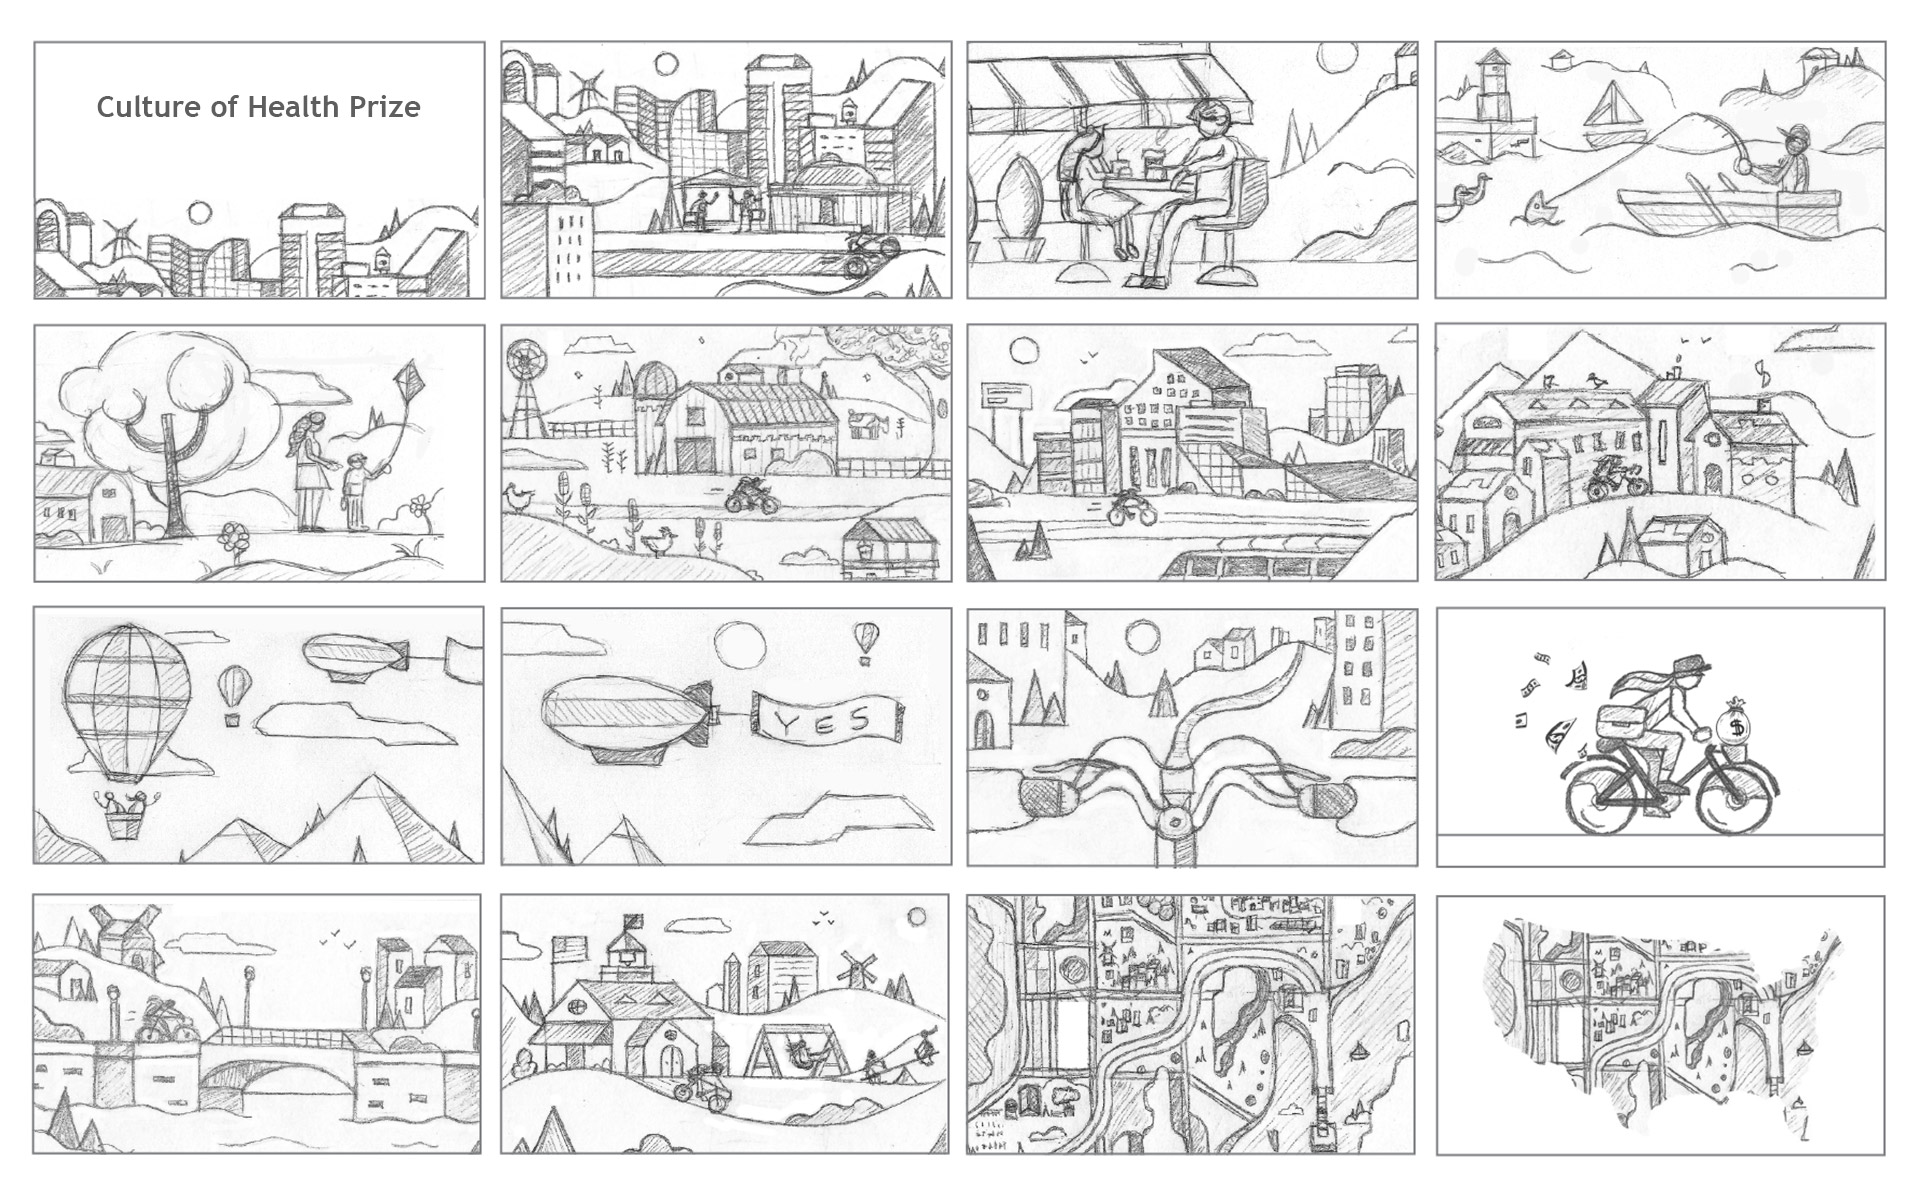 RWJF-Culture-Of-Health-Prize-storyboards-full